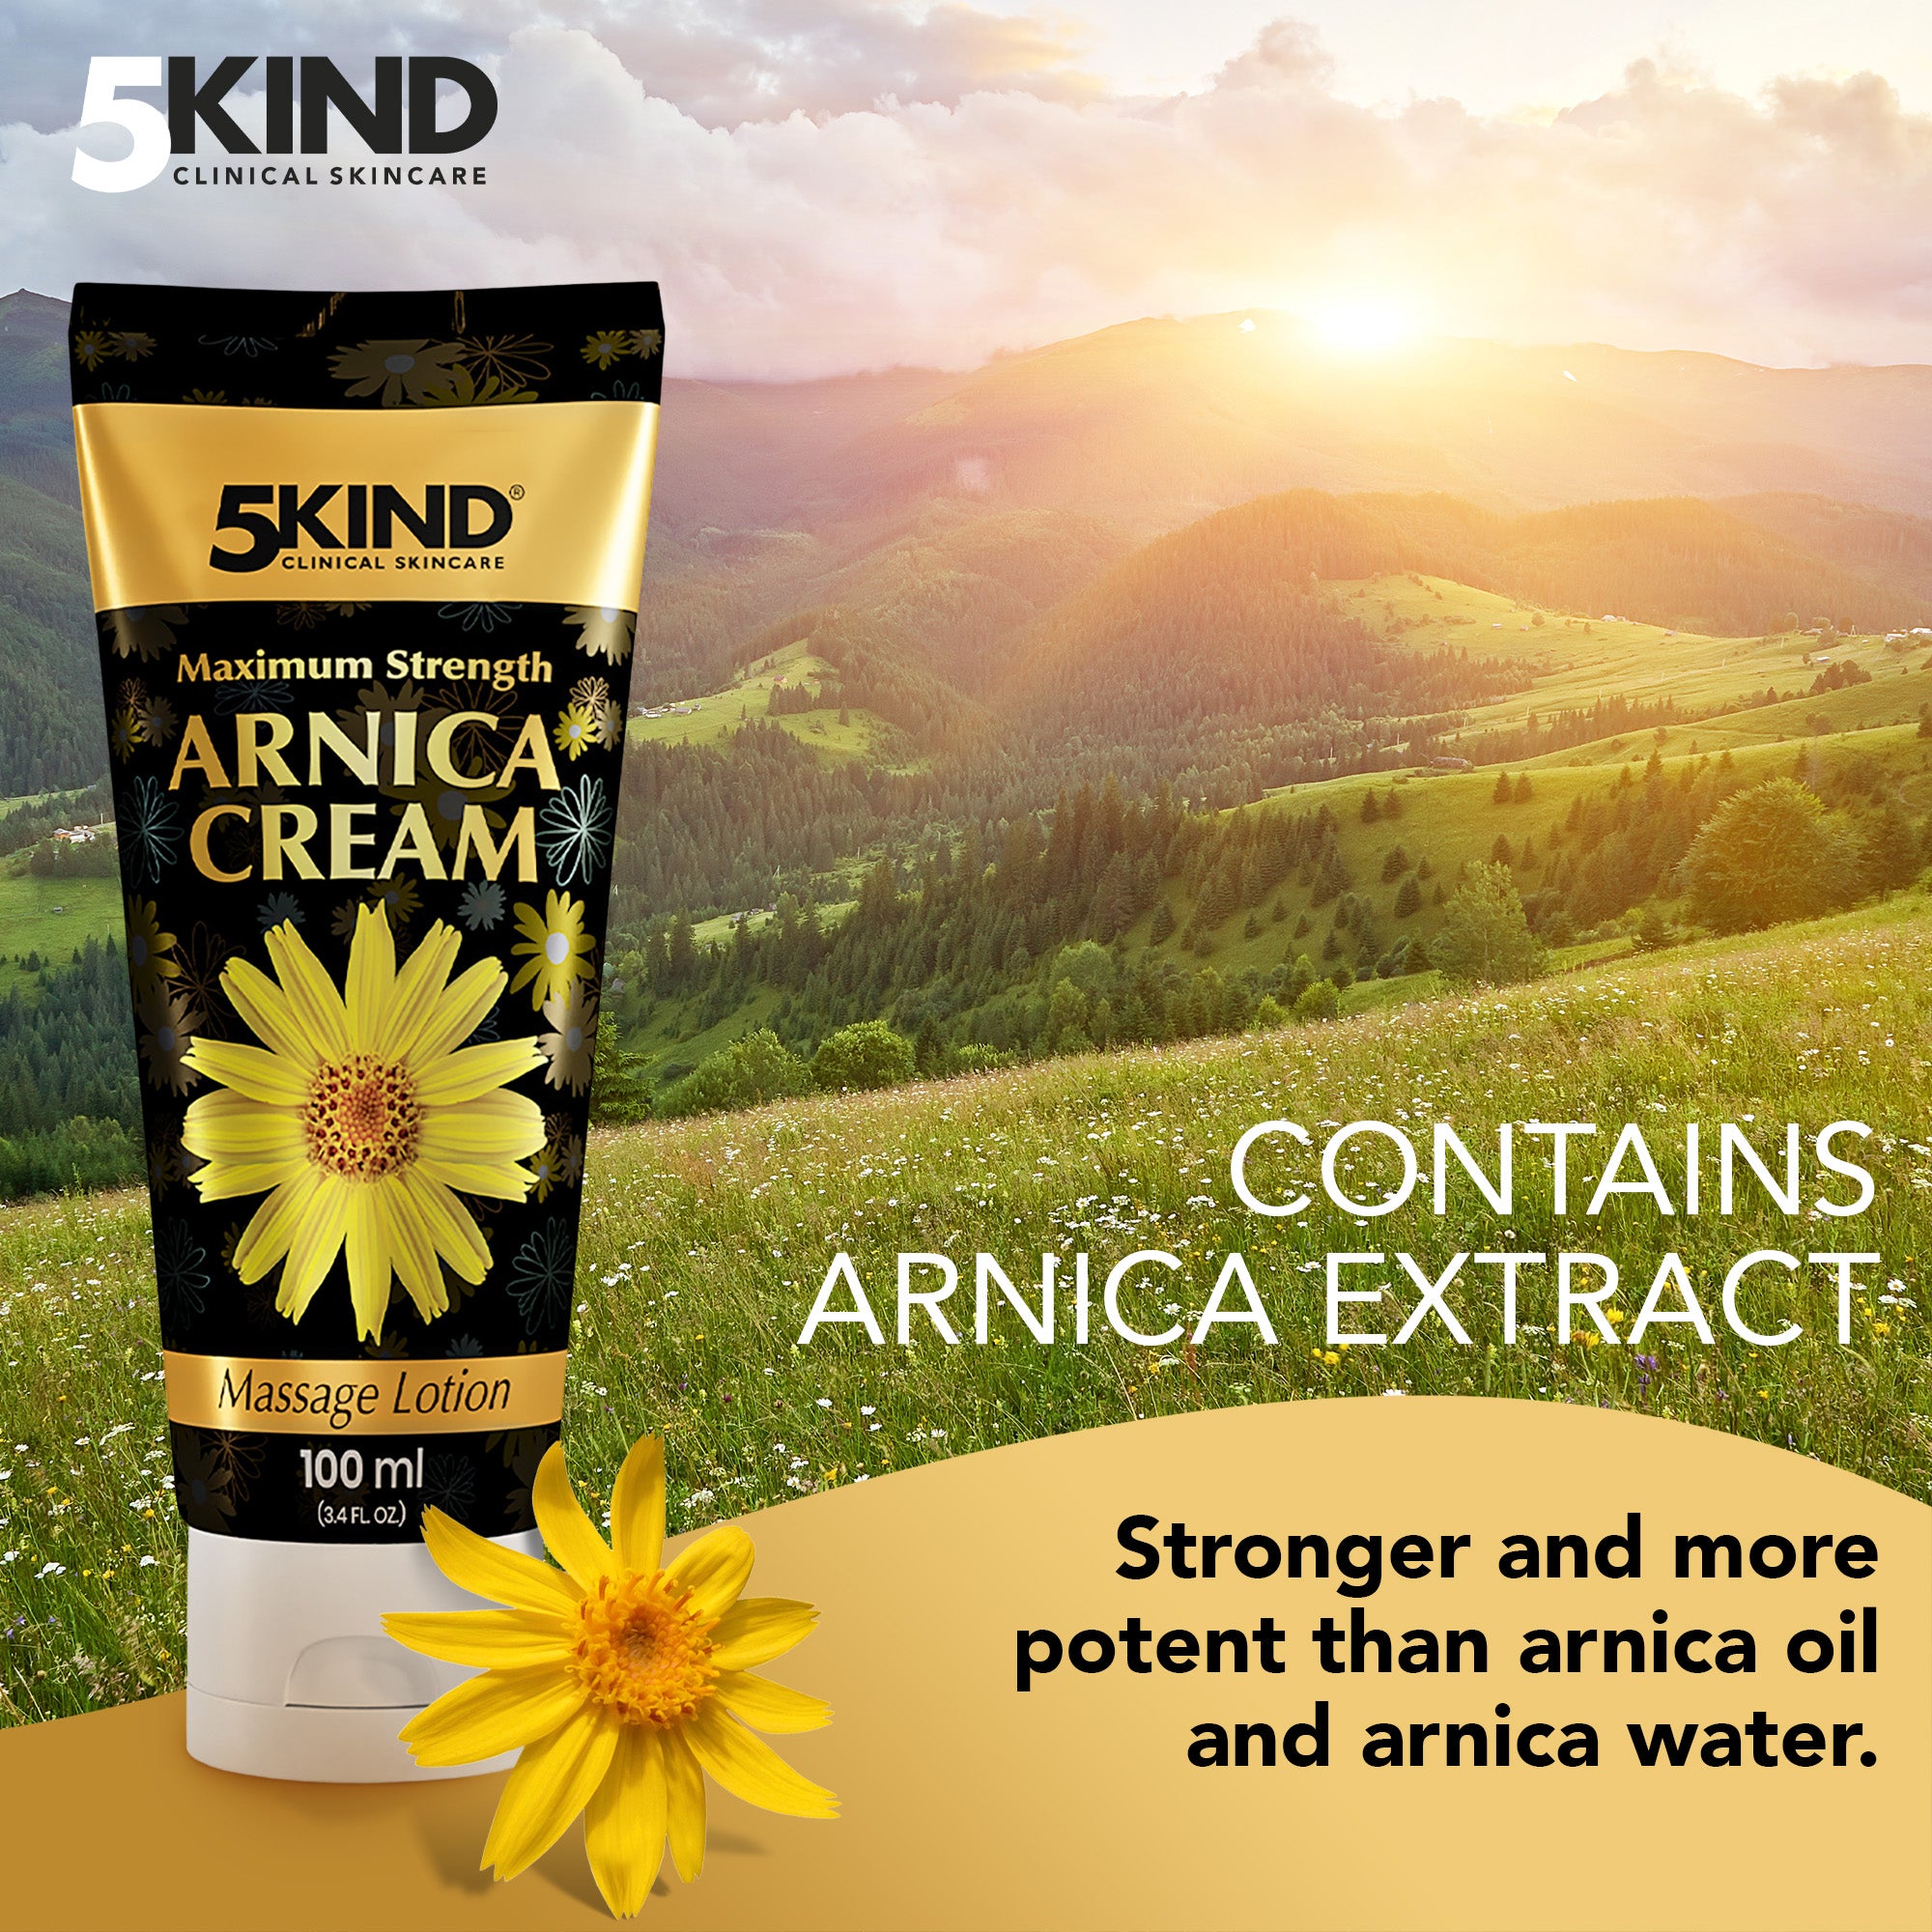 5Kind launches a new high concentration  Arnica Massage Lotion